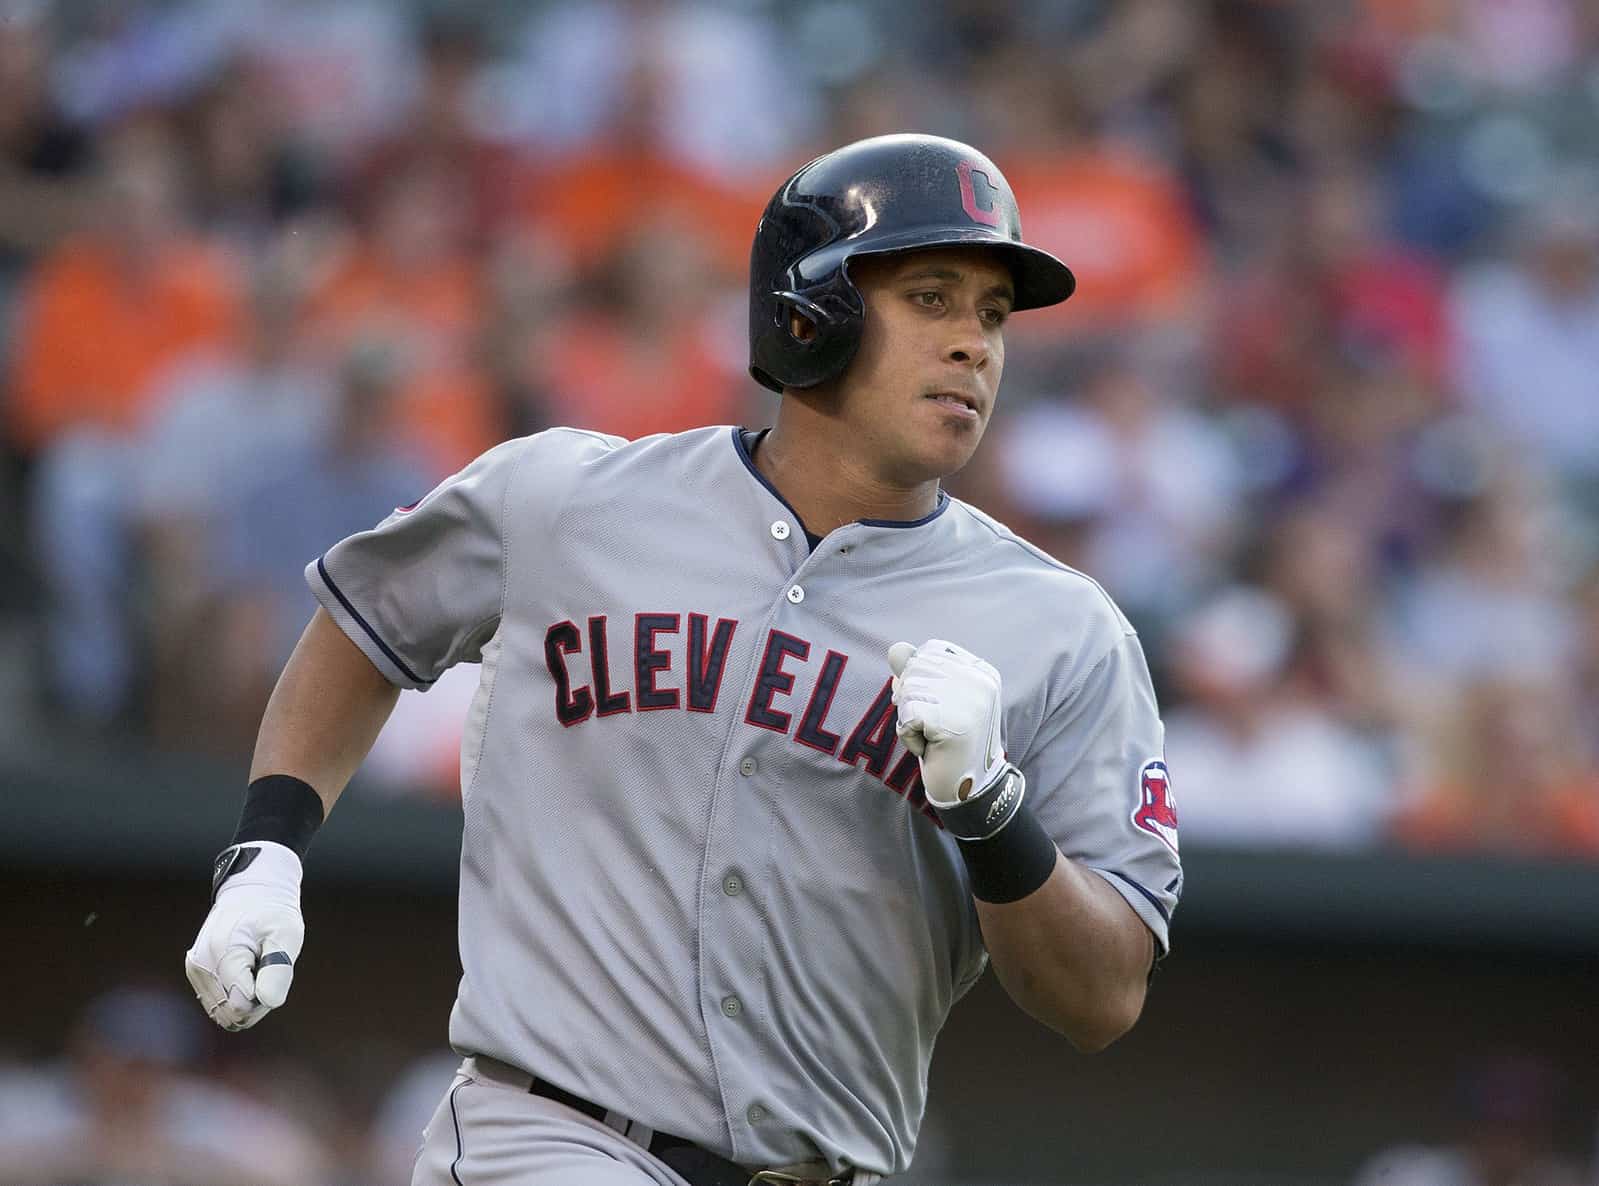 Should the Phillies pursue Michael Brantley? – Philly Sports